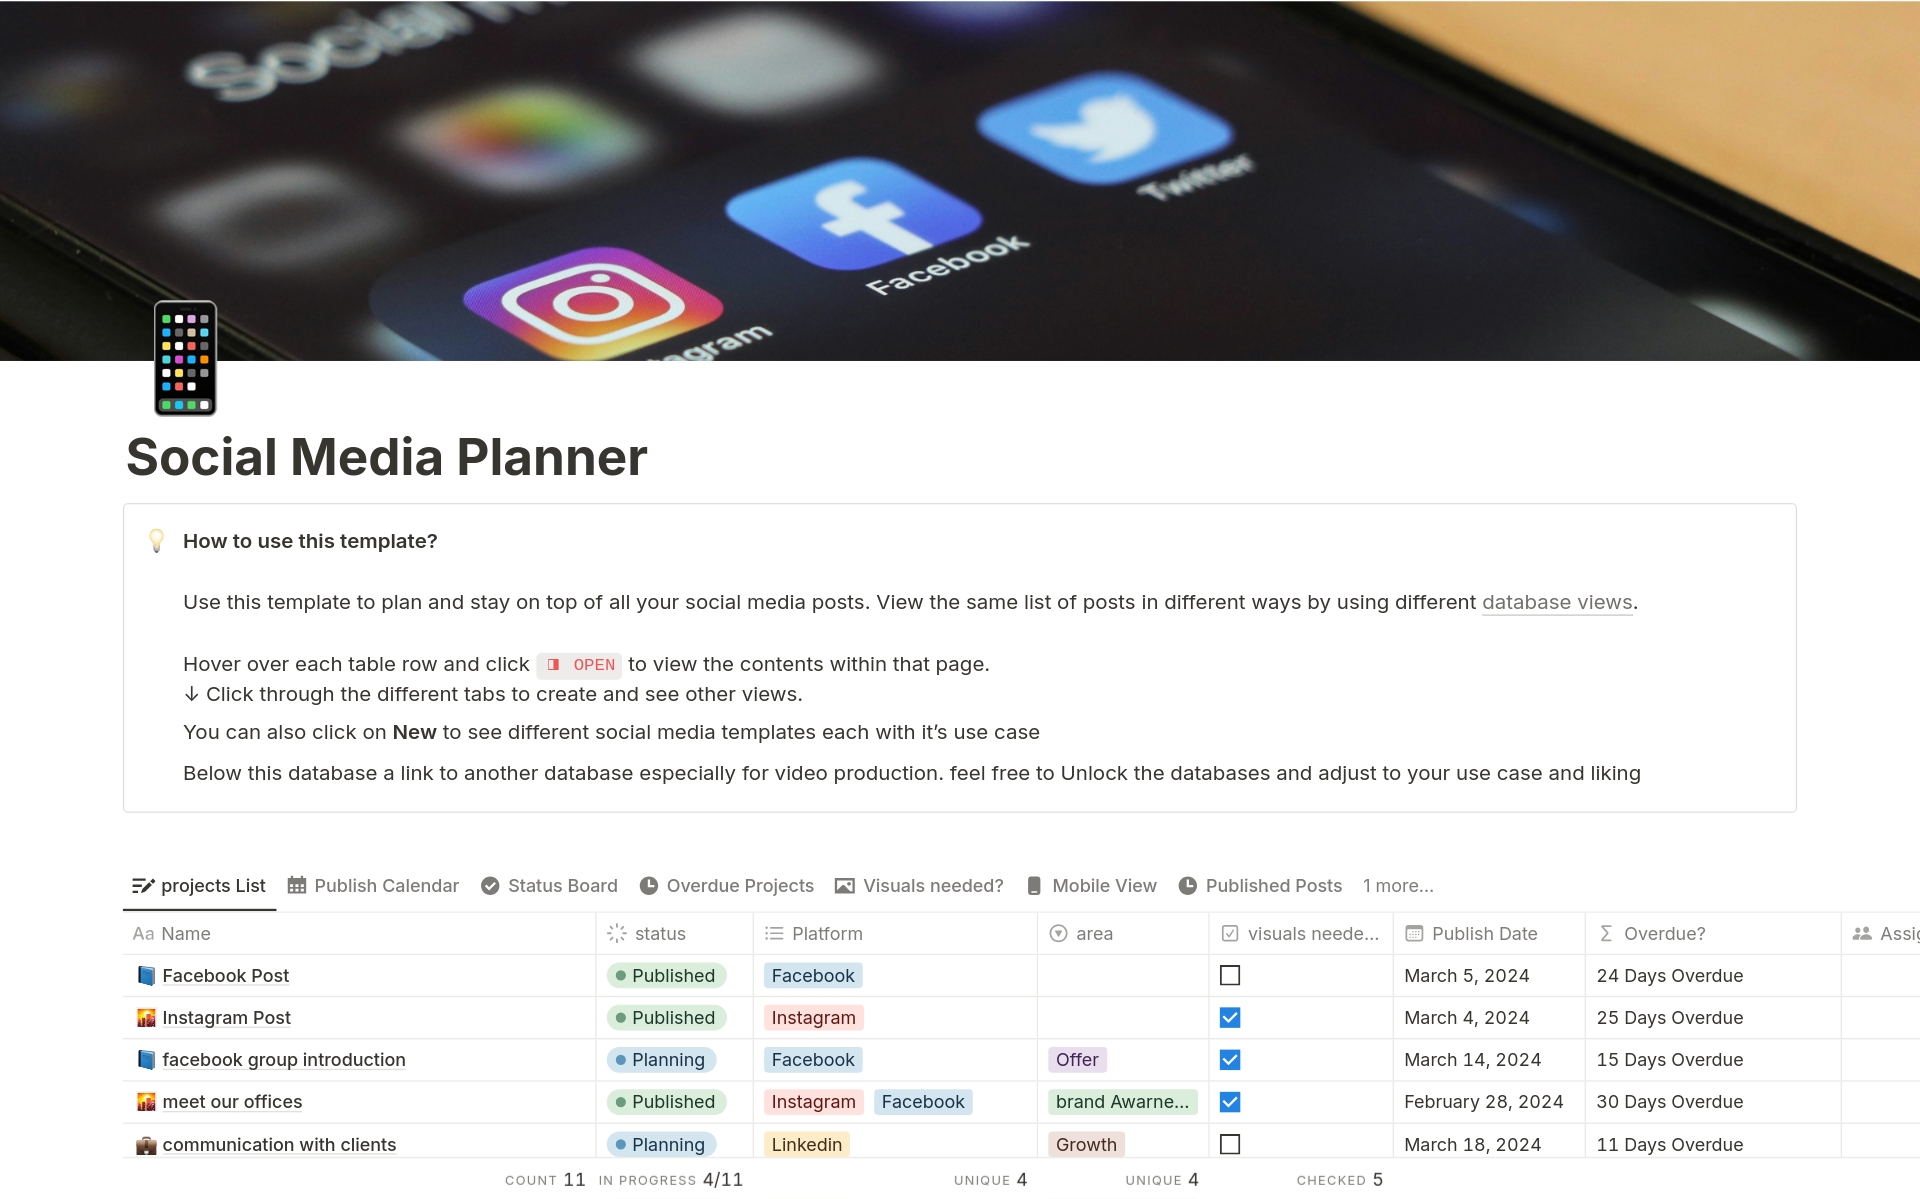 Tired of Losing track of your different content on different platforms?
using this notion, you can manage your social media projects+ a bonus section to manage video productions.